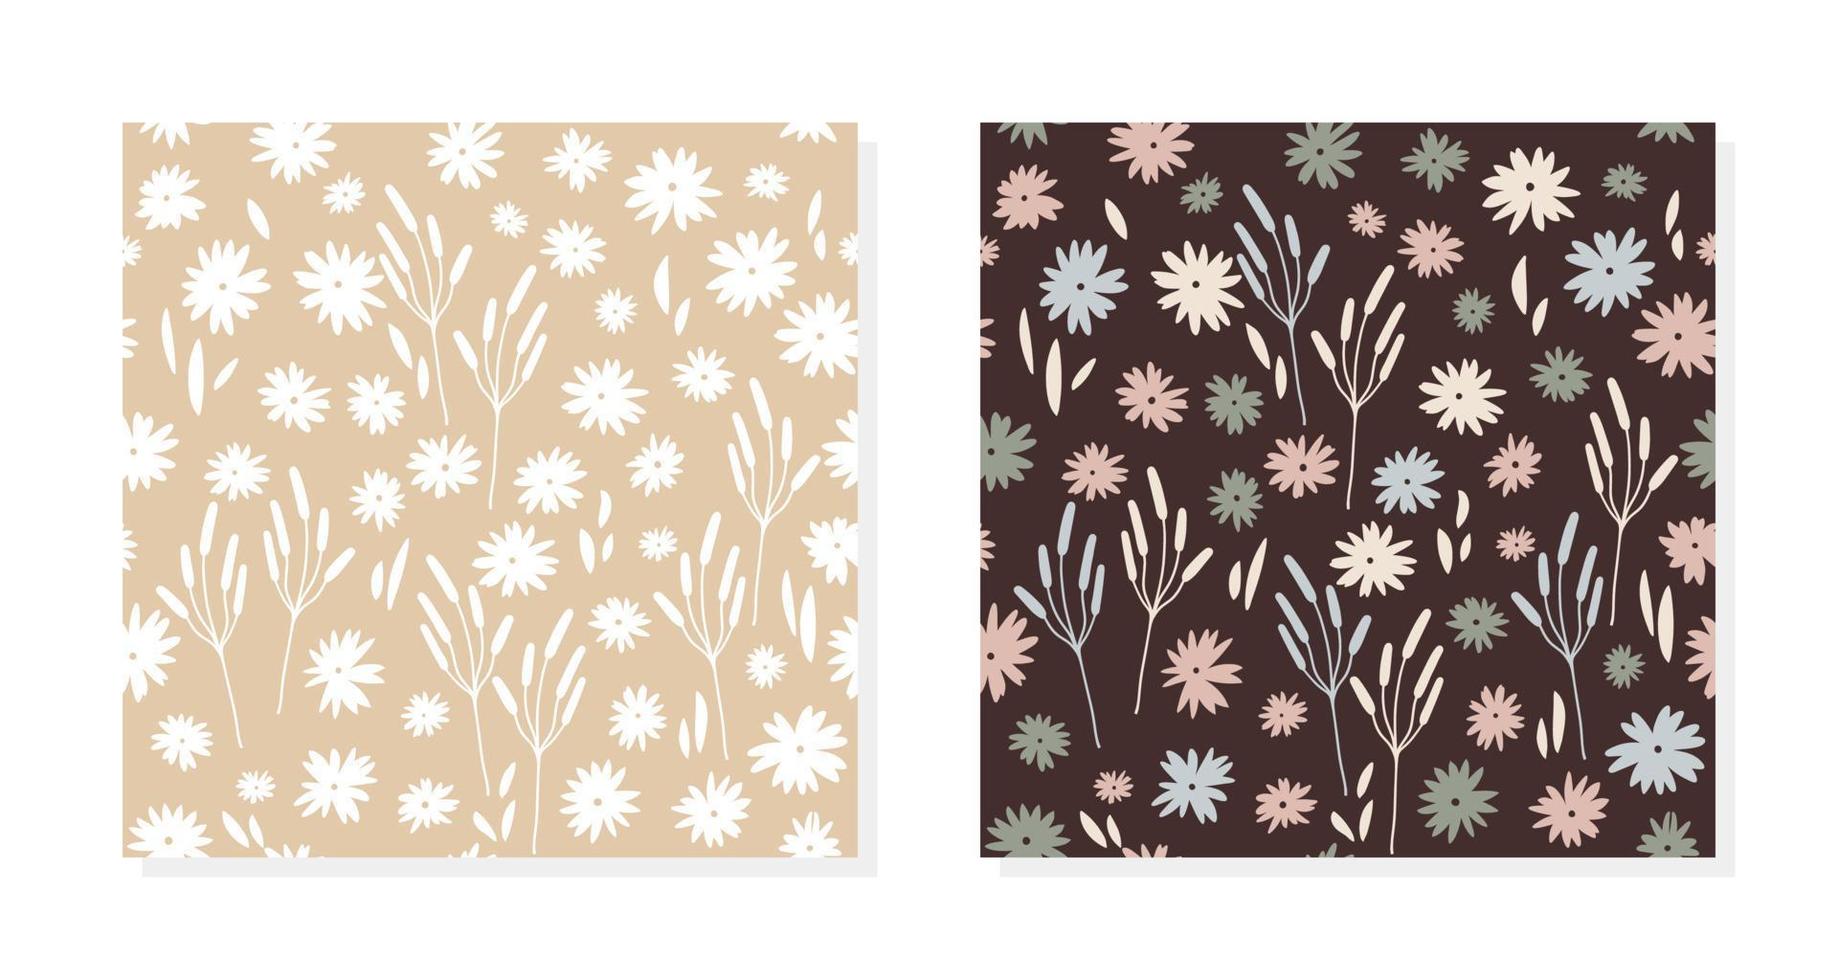 Floral patterns in two color versions. Pretty flowers on beige and dark brown background. Printing with small flowers vector